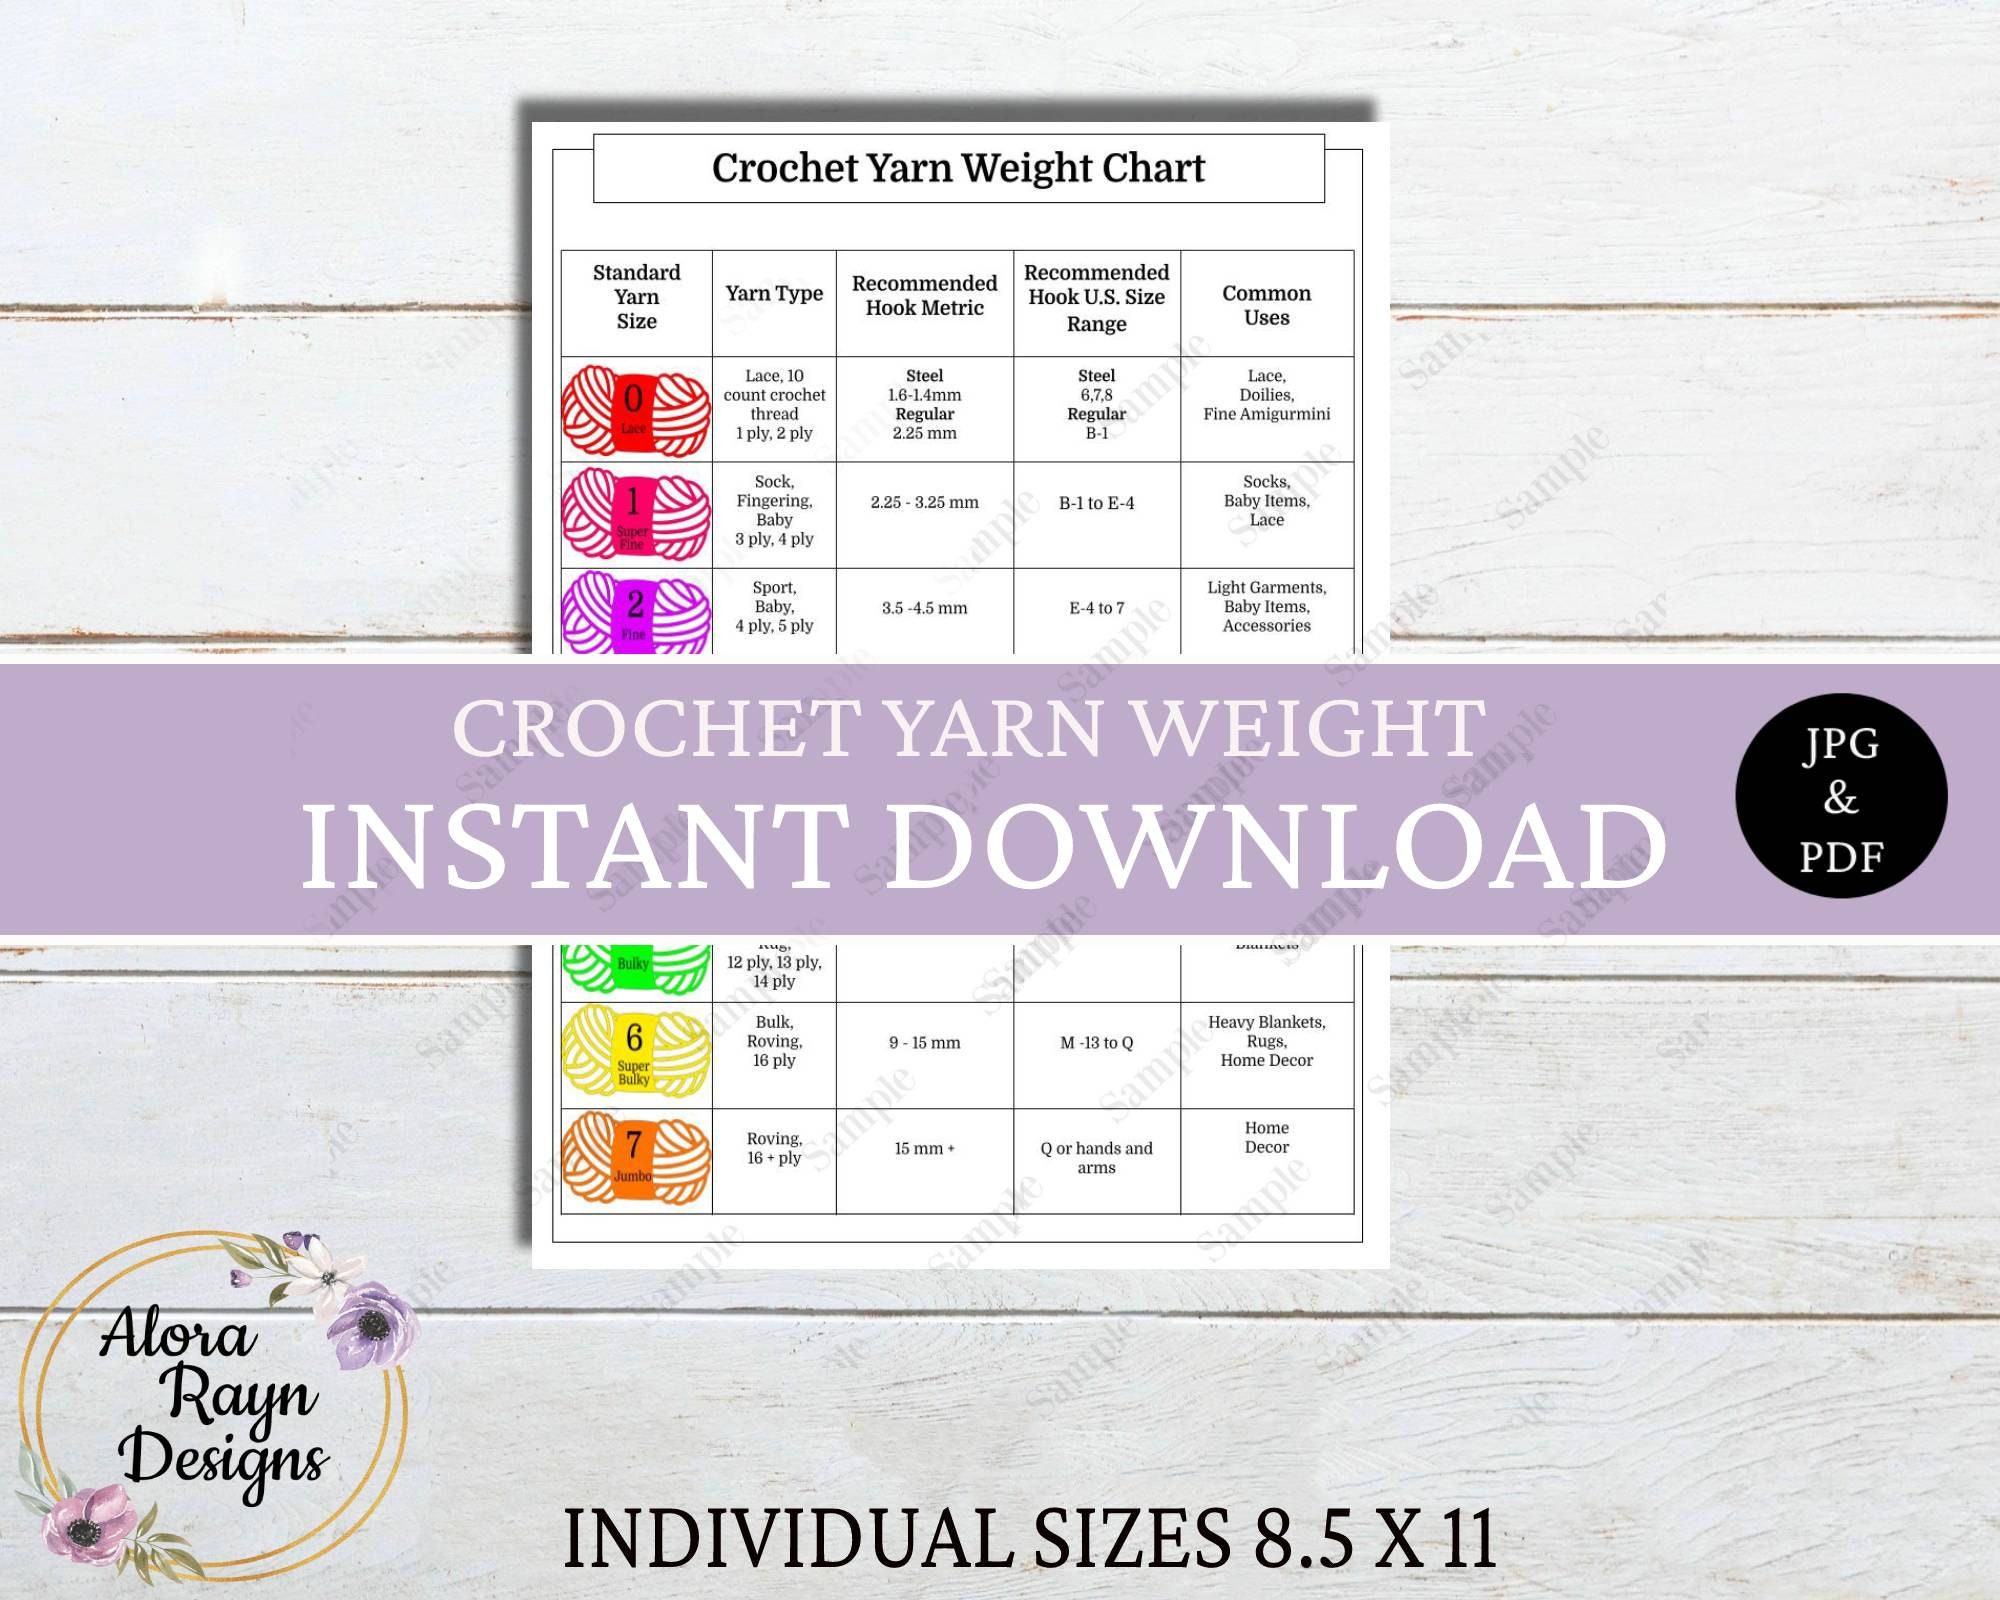 Yarn weight conversion chart and beginner's guide - Gathered